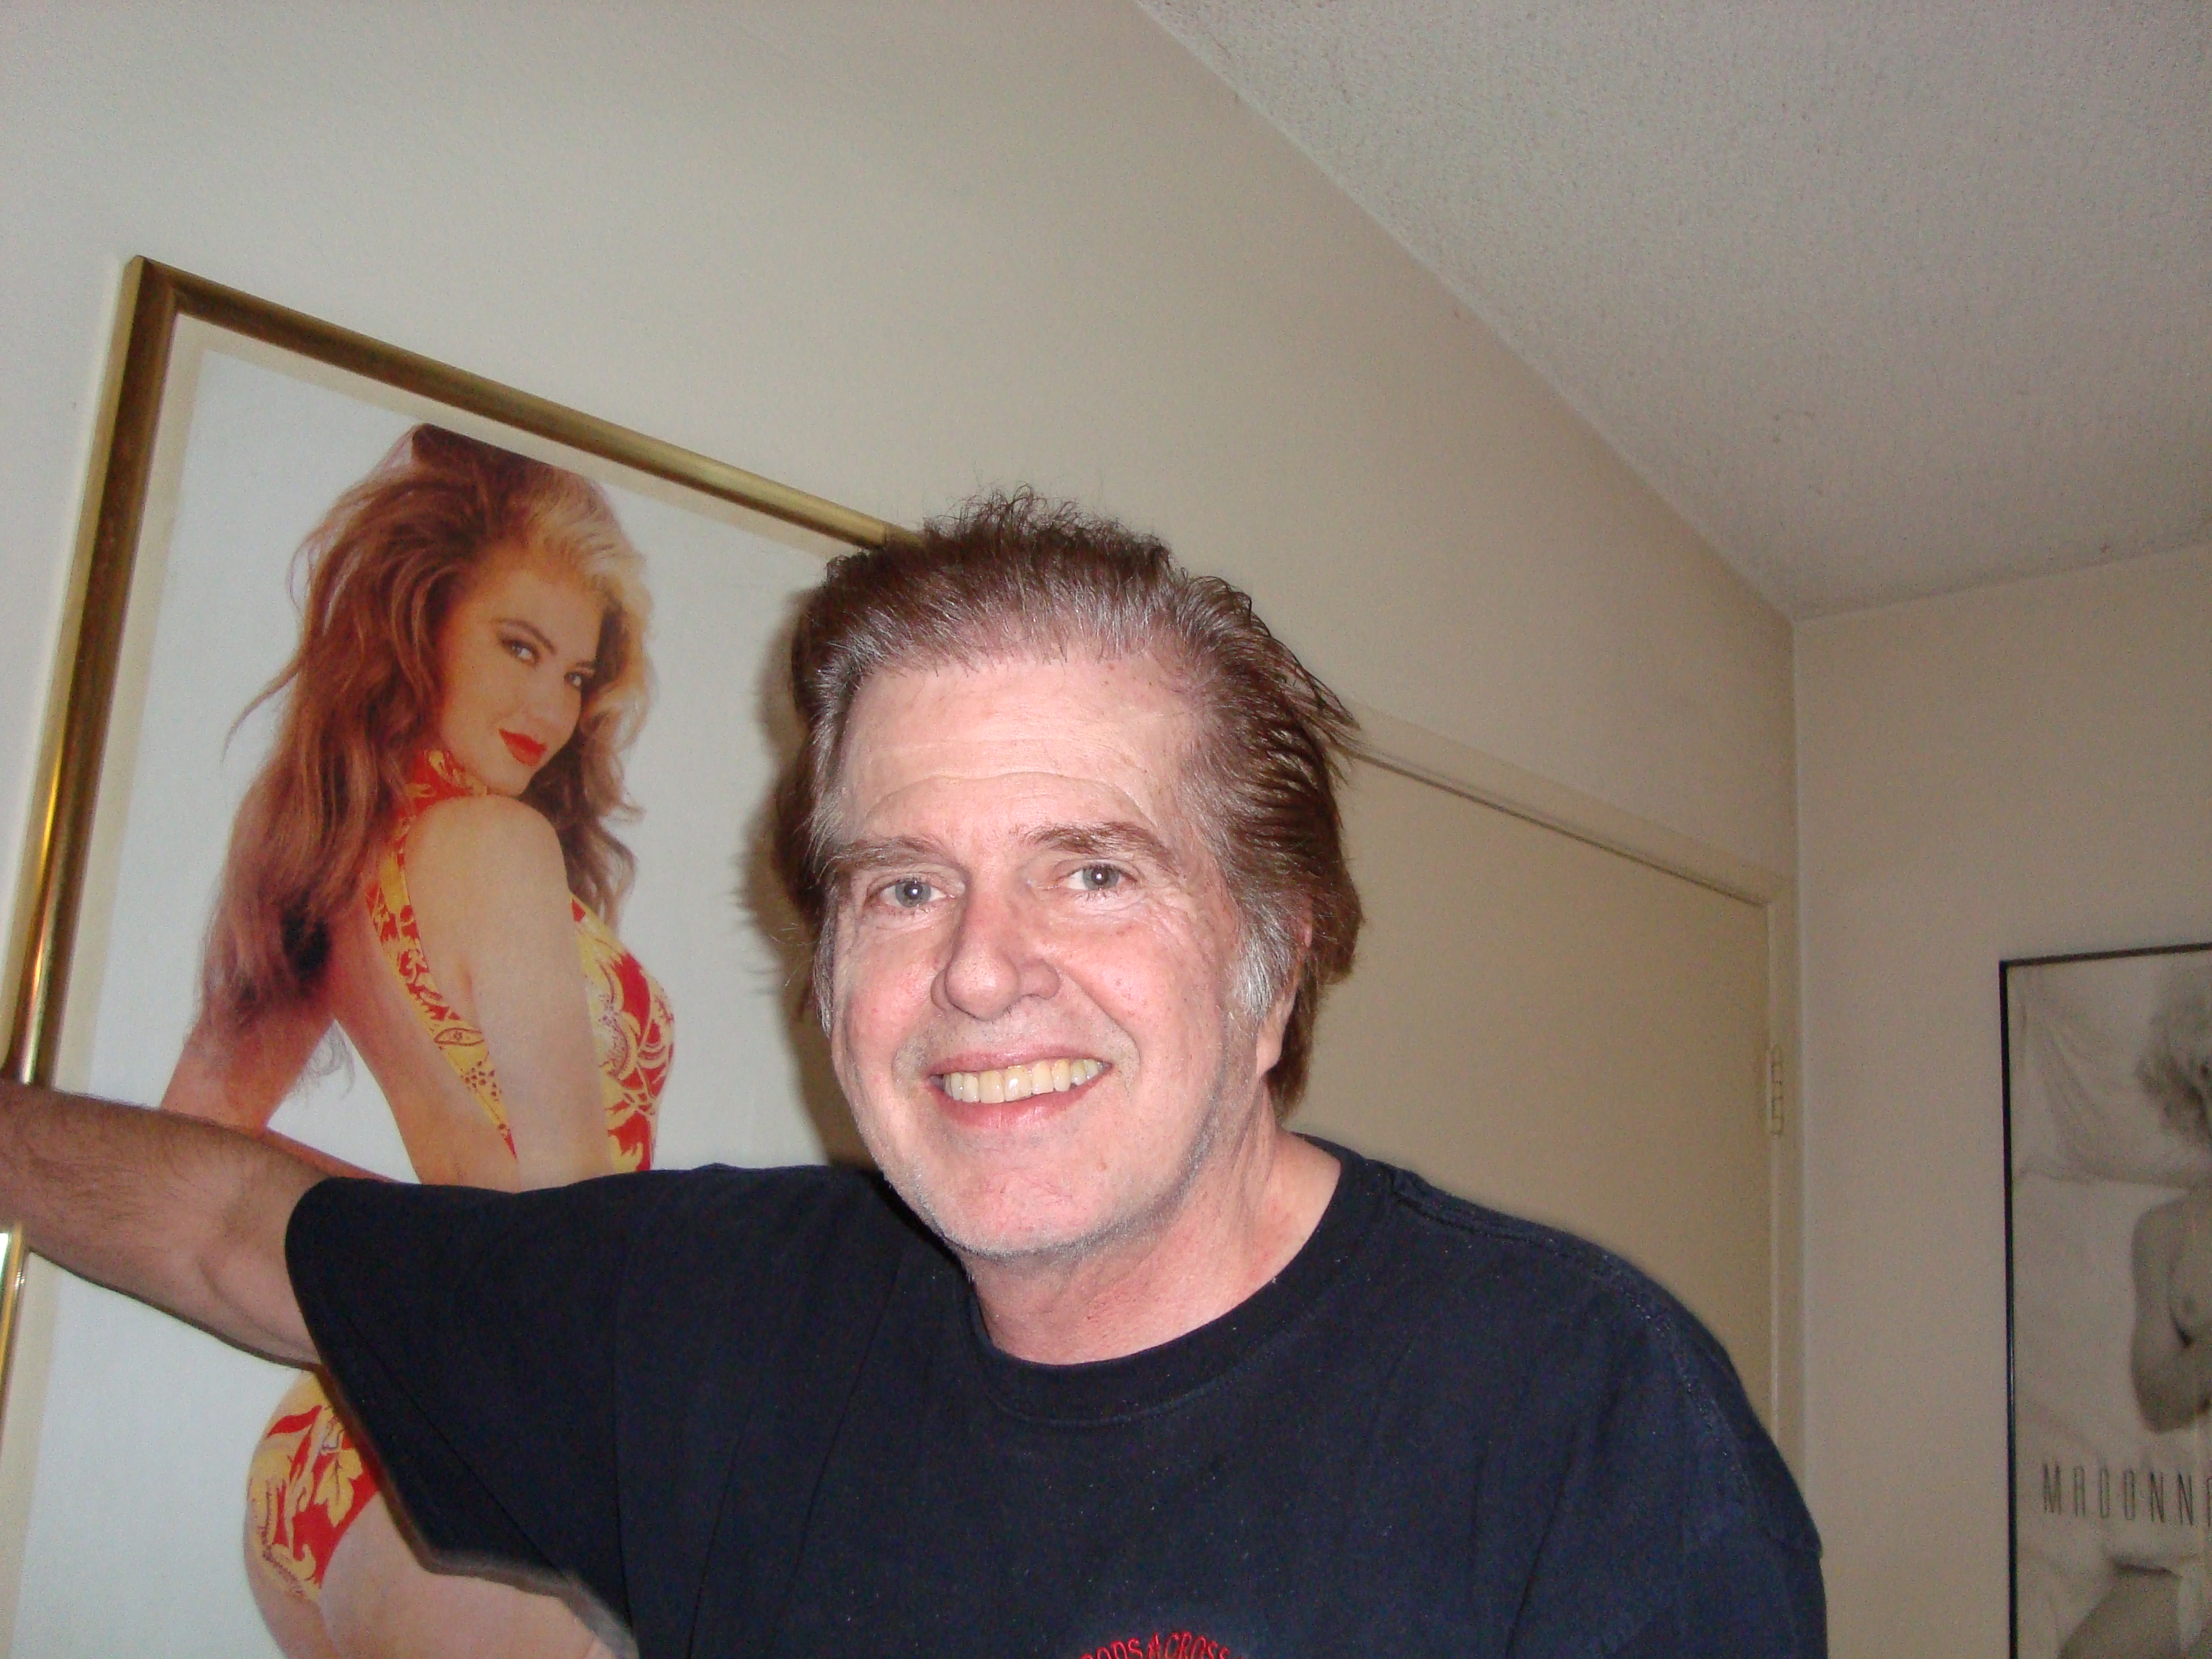 2009, in front of Thalia poster